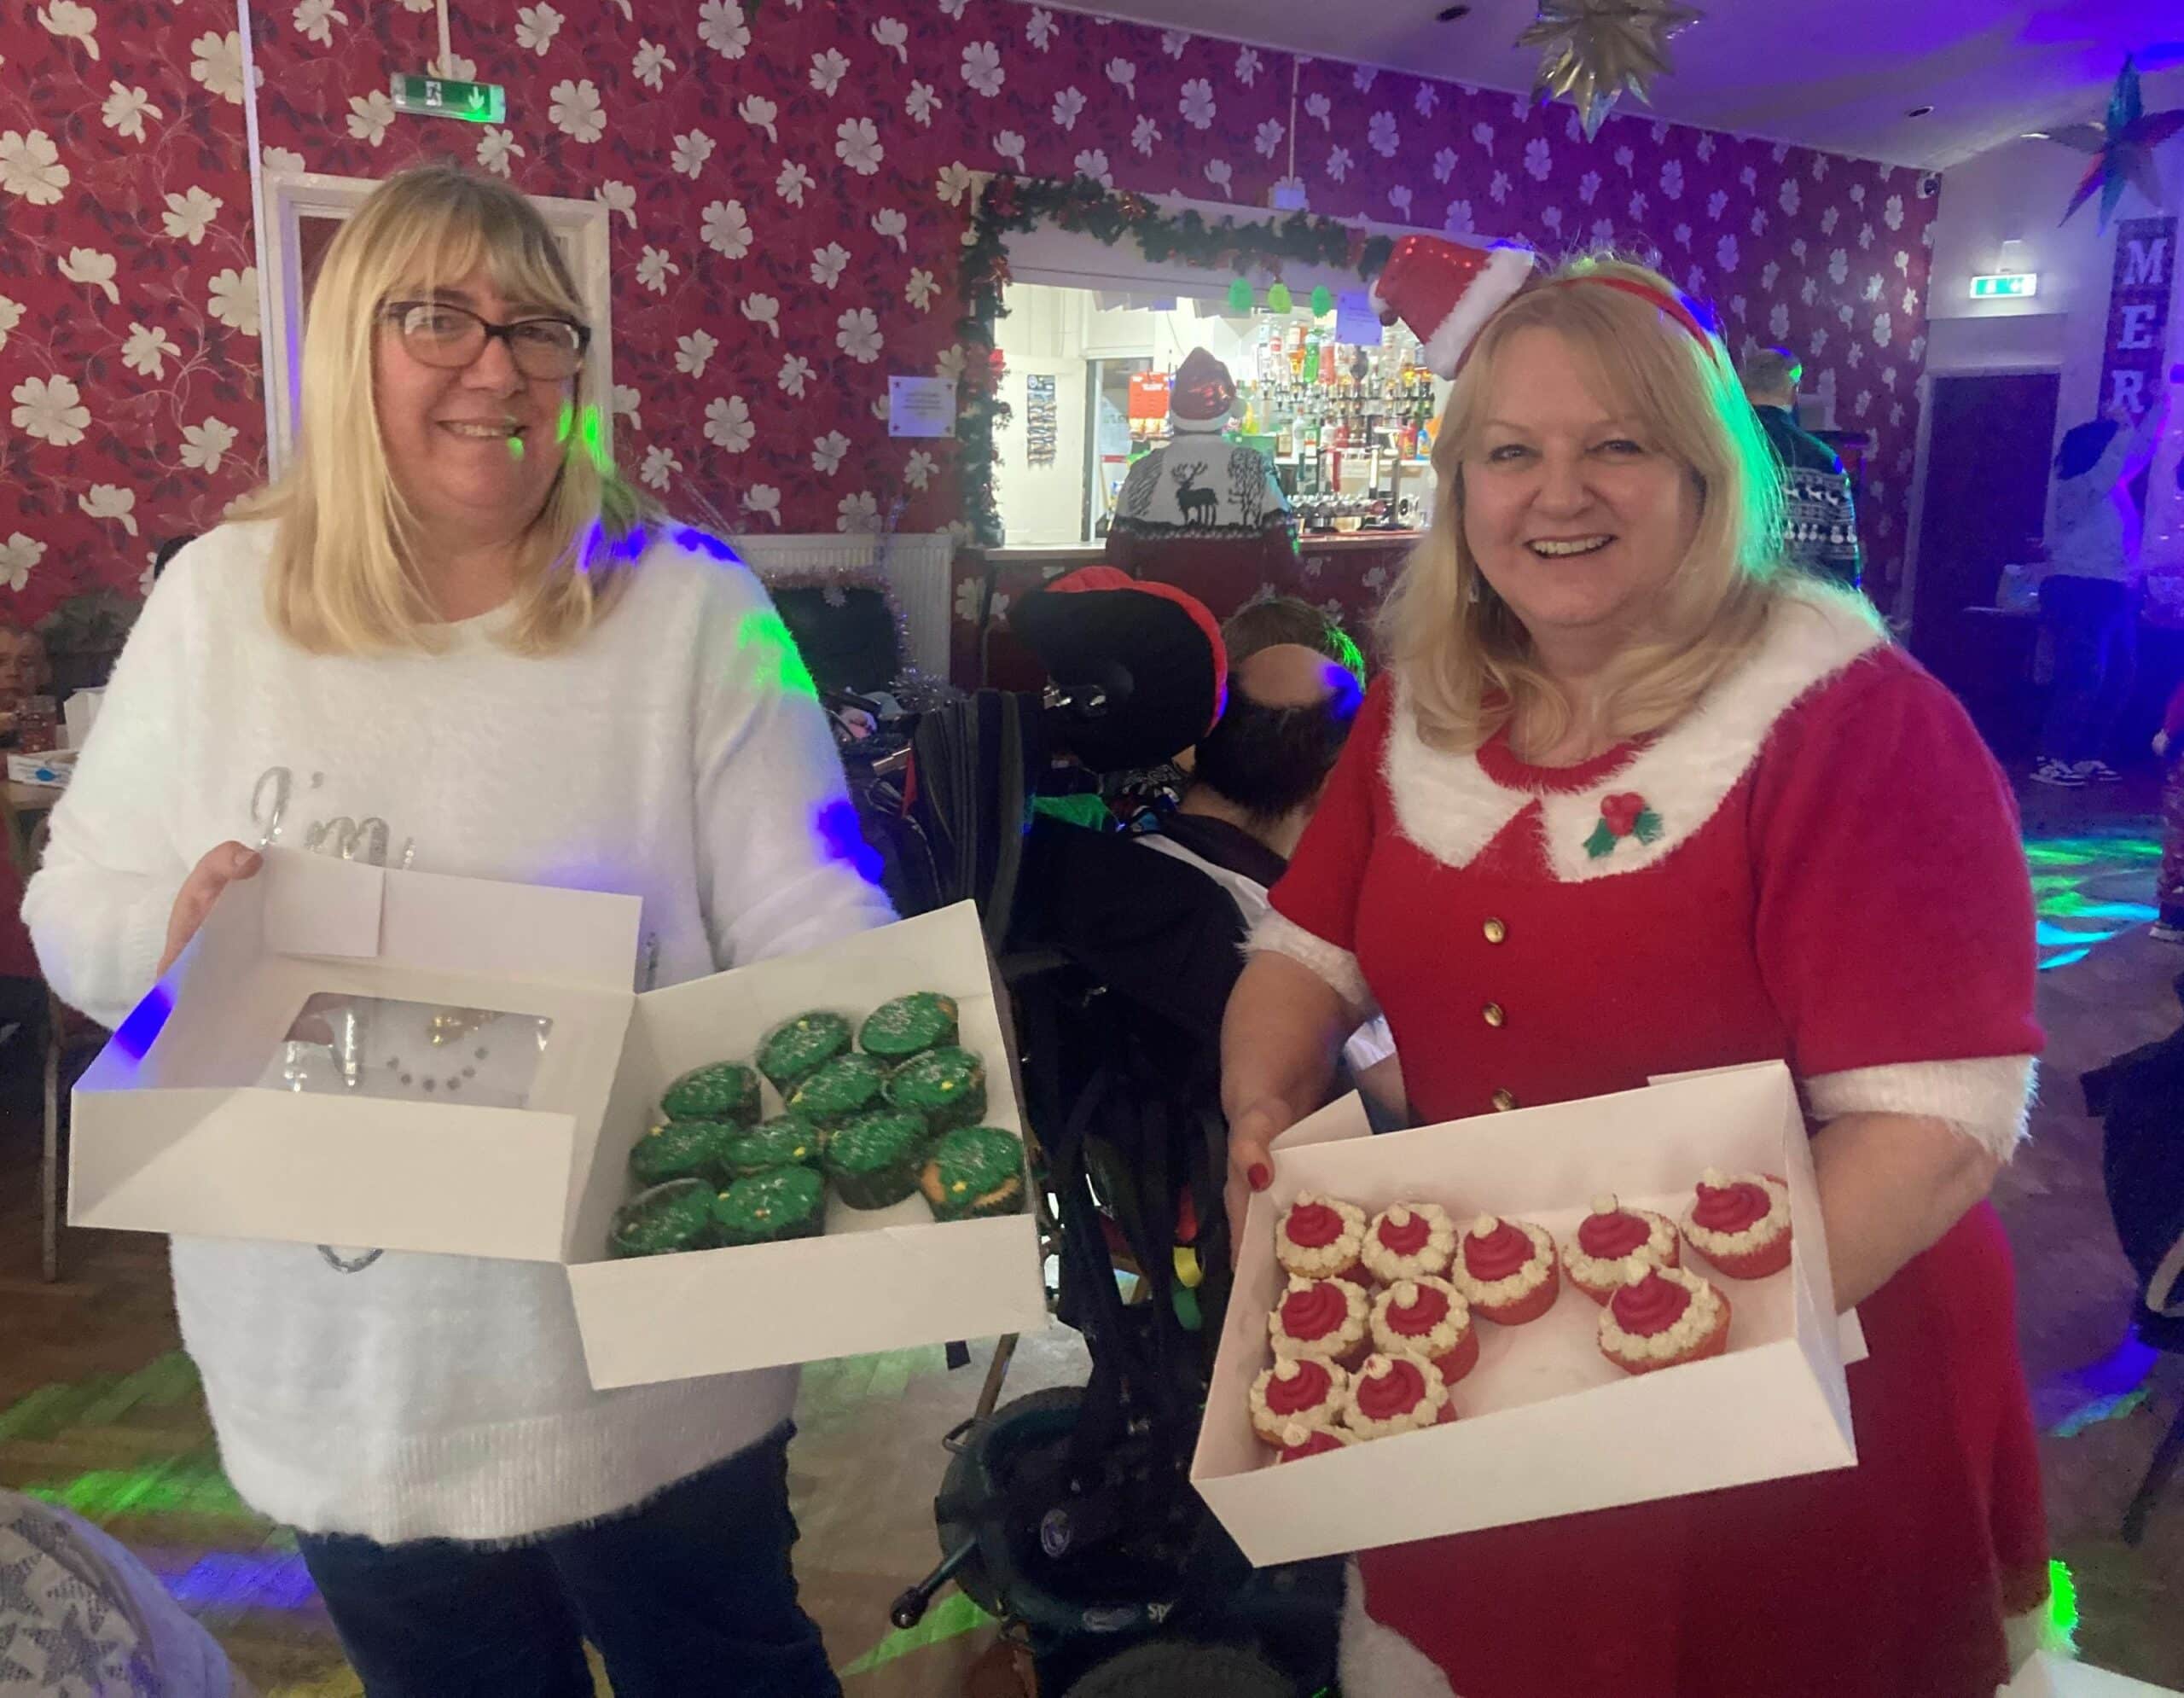 Jo Pursglove and Debbie Smith with cakes donated by Derbyshire science company Lubrizol